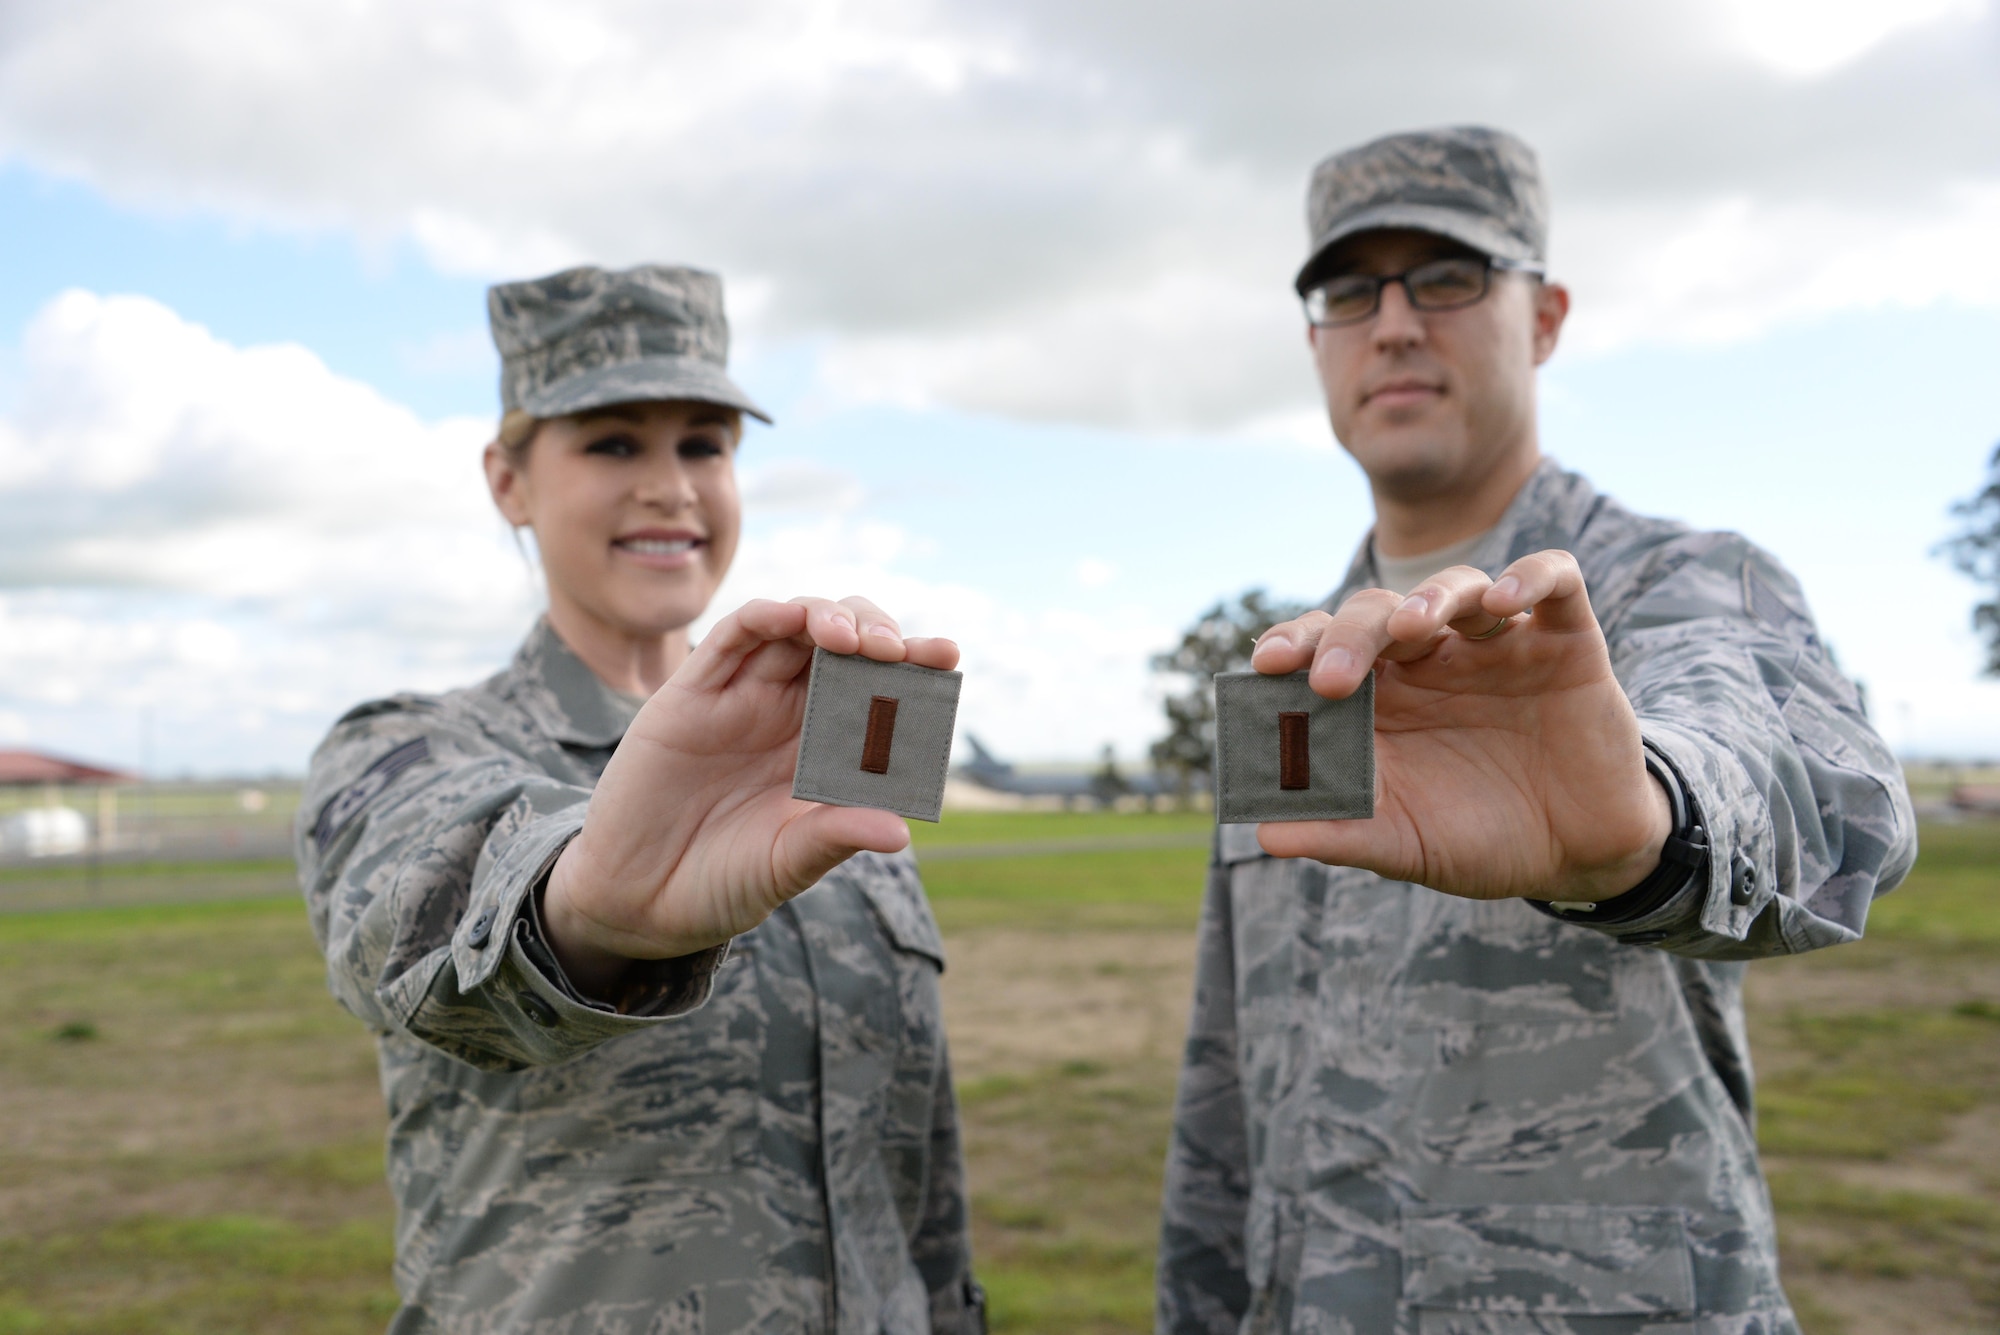 Staff Sgt. Katherine Little and Tech Sgt. Maurice Morrell, both part of the 60th Air Mobility Wing Comptroller Squadron, proudly display their future second lieutenant ranks at Travis Air Force Base, Calif. Little and Morrell were each selected for Officer Training School and will commission at the end of their OTS classes in January and March, respectively. (U.S. Air Force photo by 2nd Lt. Sarah Johnson)